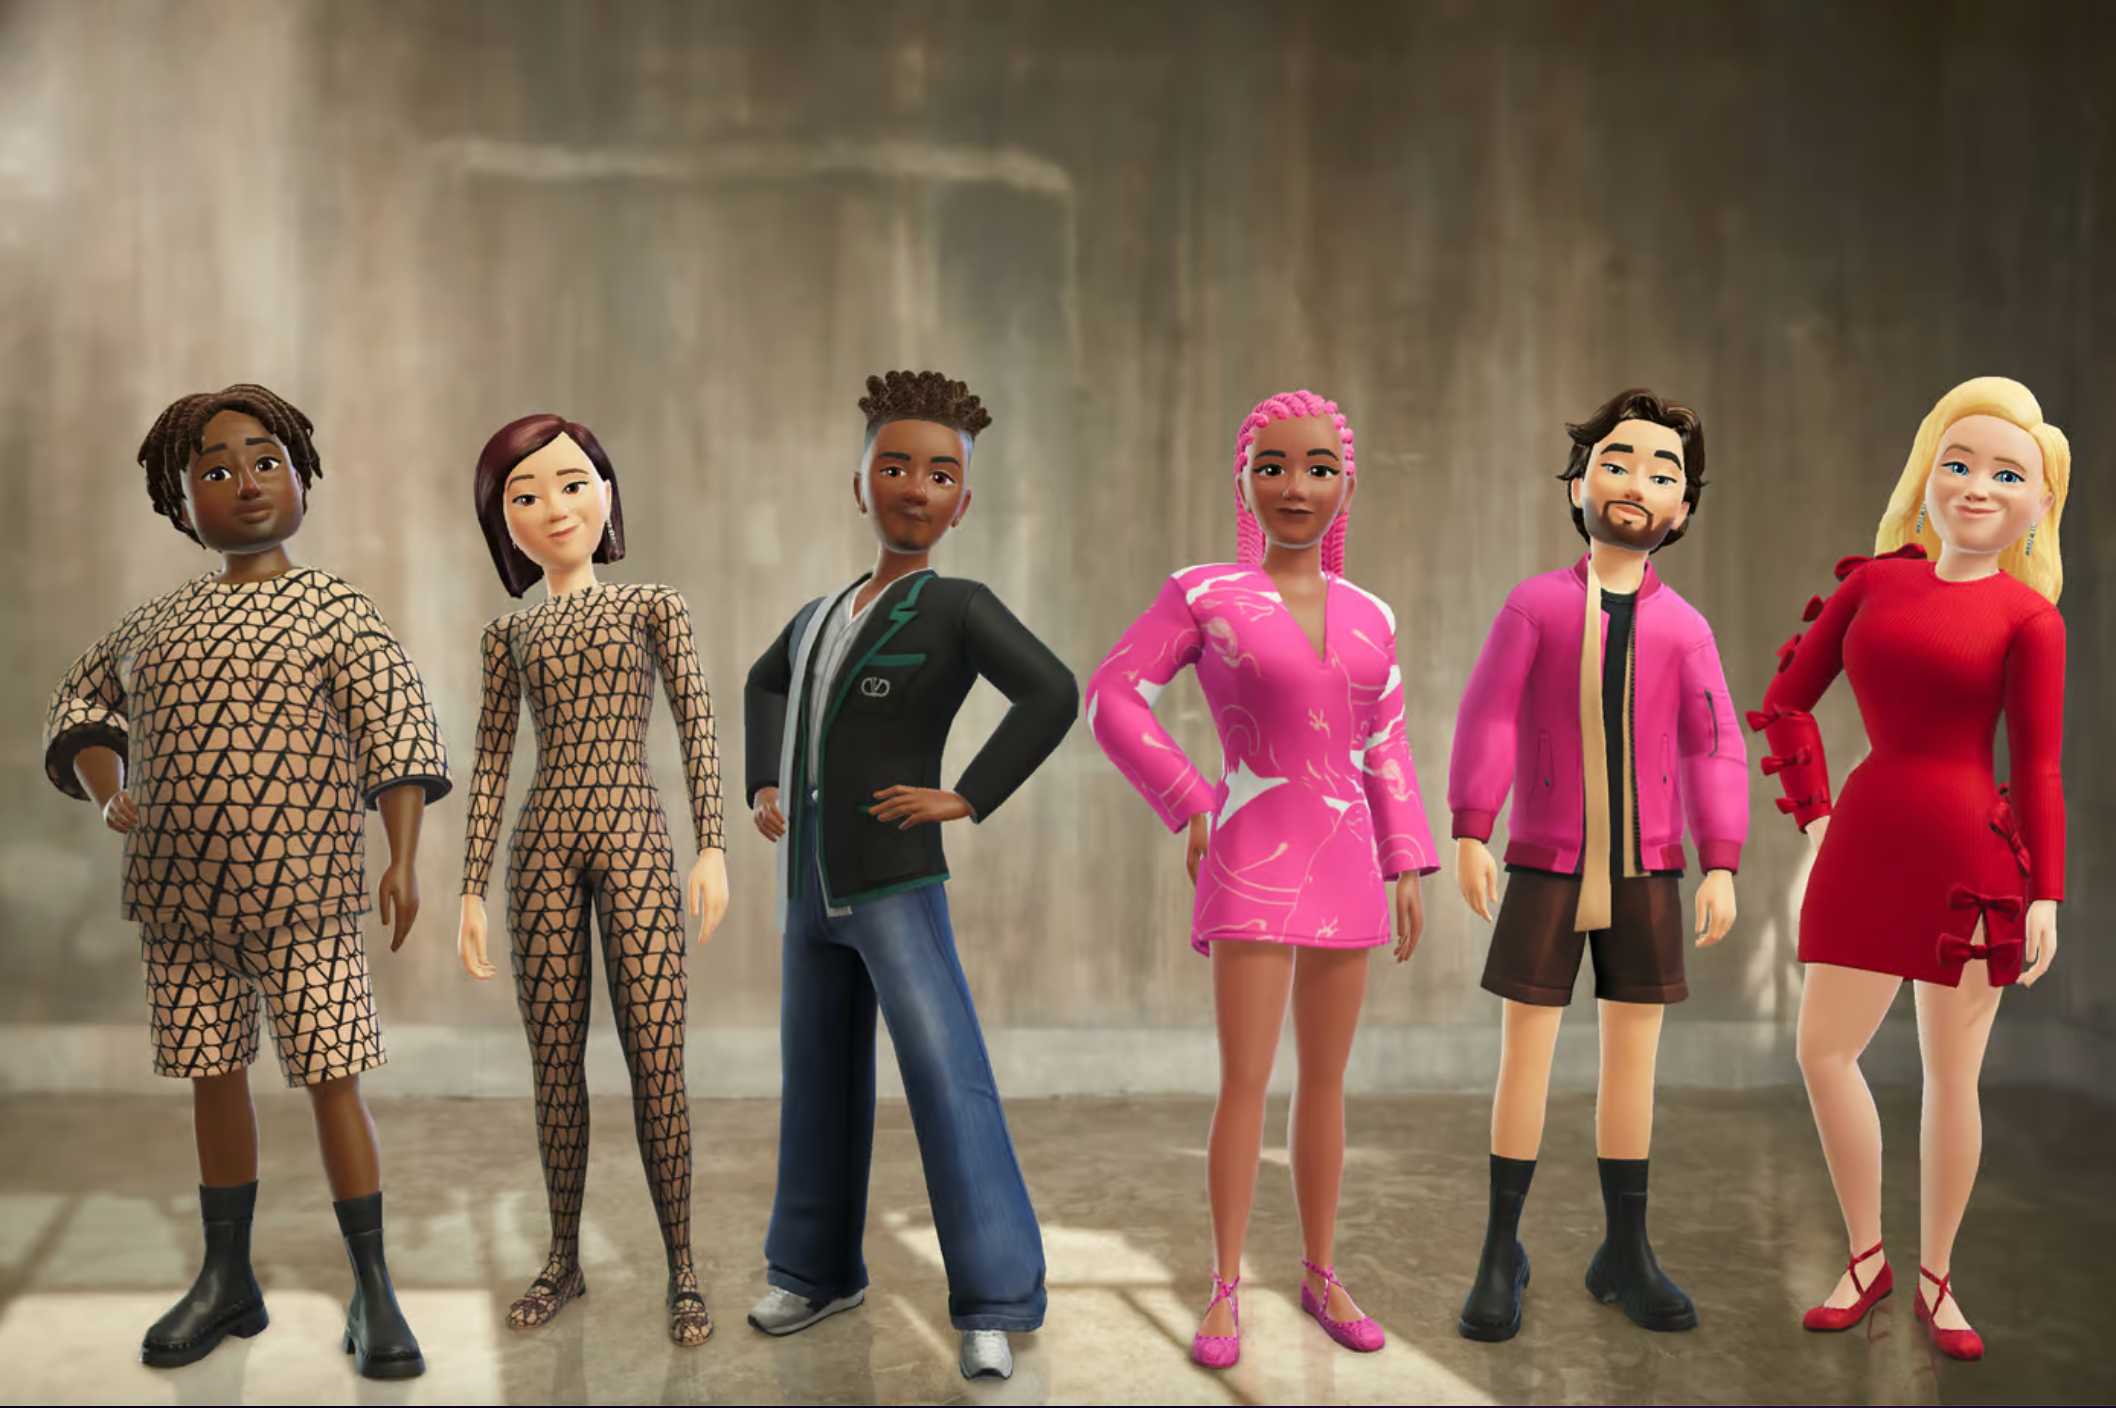 Brands including Valentino, Balenciaga, and Thom Browne have joined Meta's avatar store to kit out digital characters. Photo: Meta